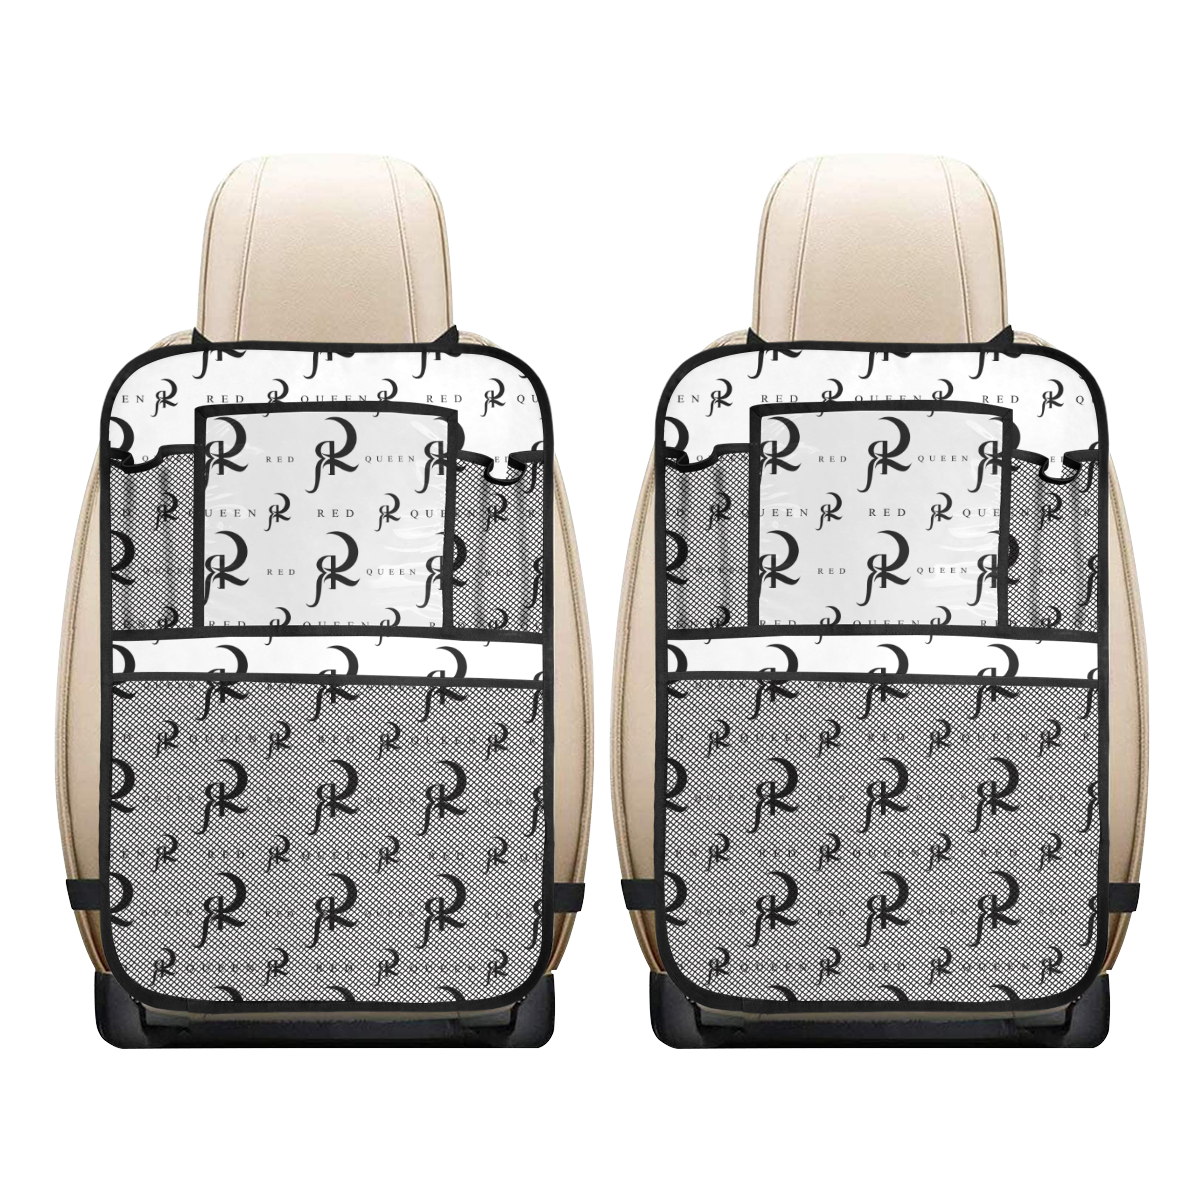 RED QUEEN BLACK & WHITE PATTERN ALL OVER Car Seat Back Organizer (2-Pack)